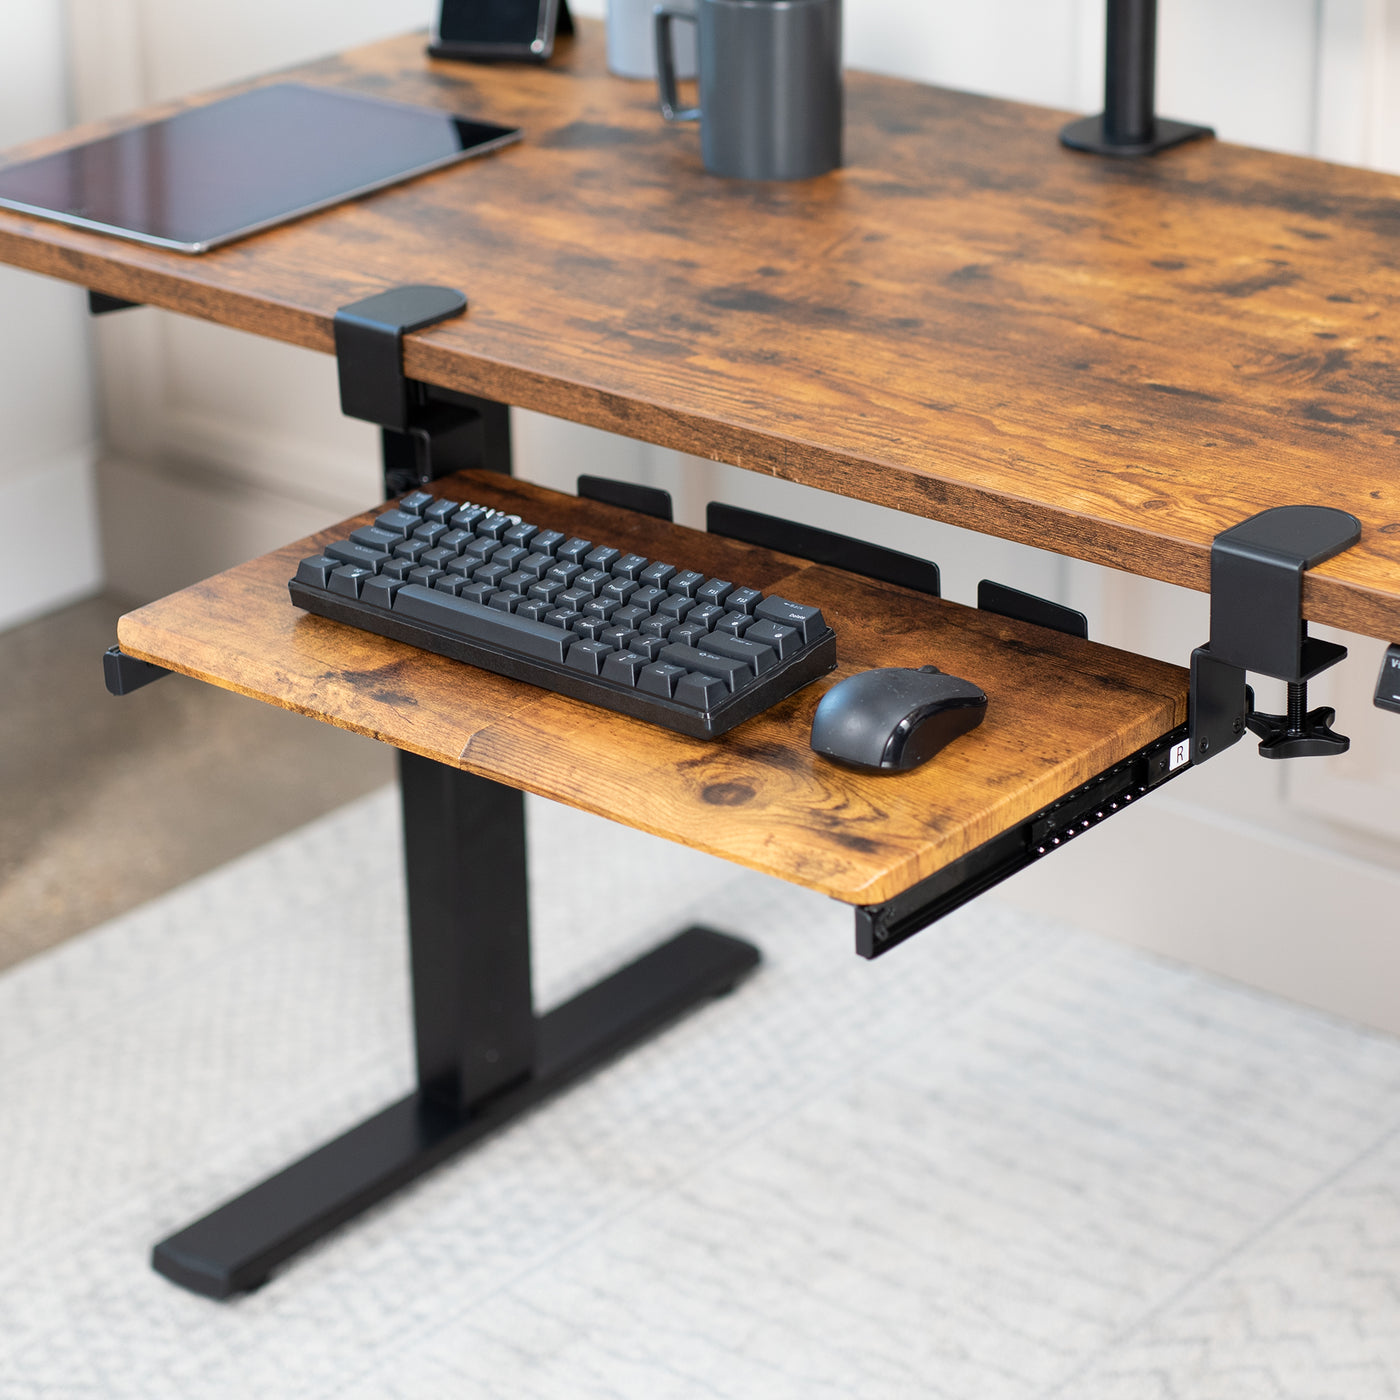 Rustic compact clamp-on pullout keyboard tray.